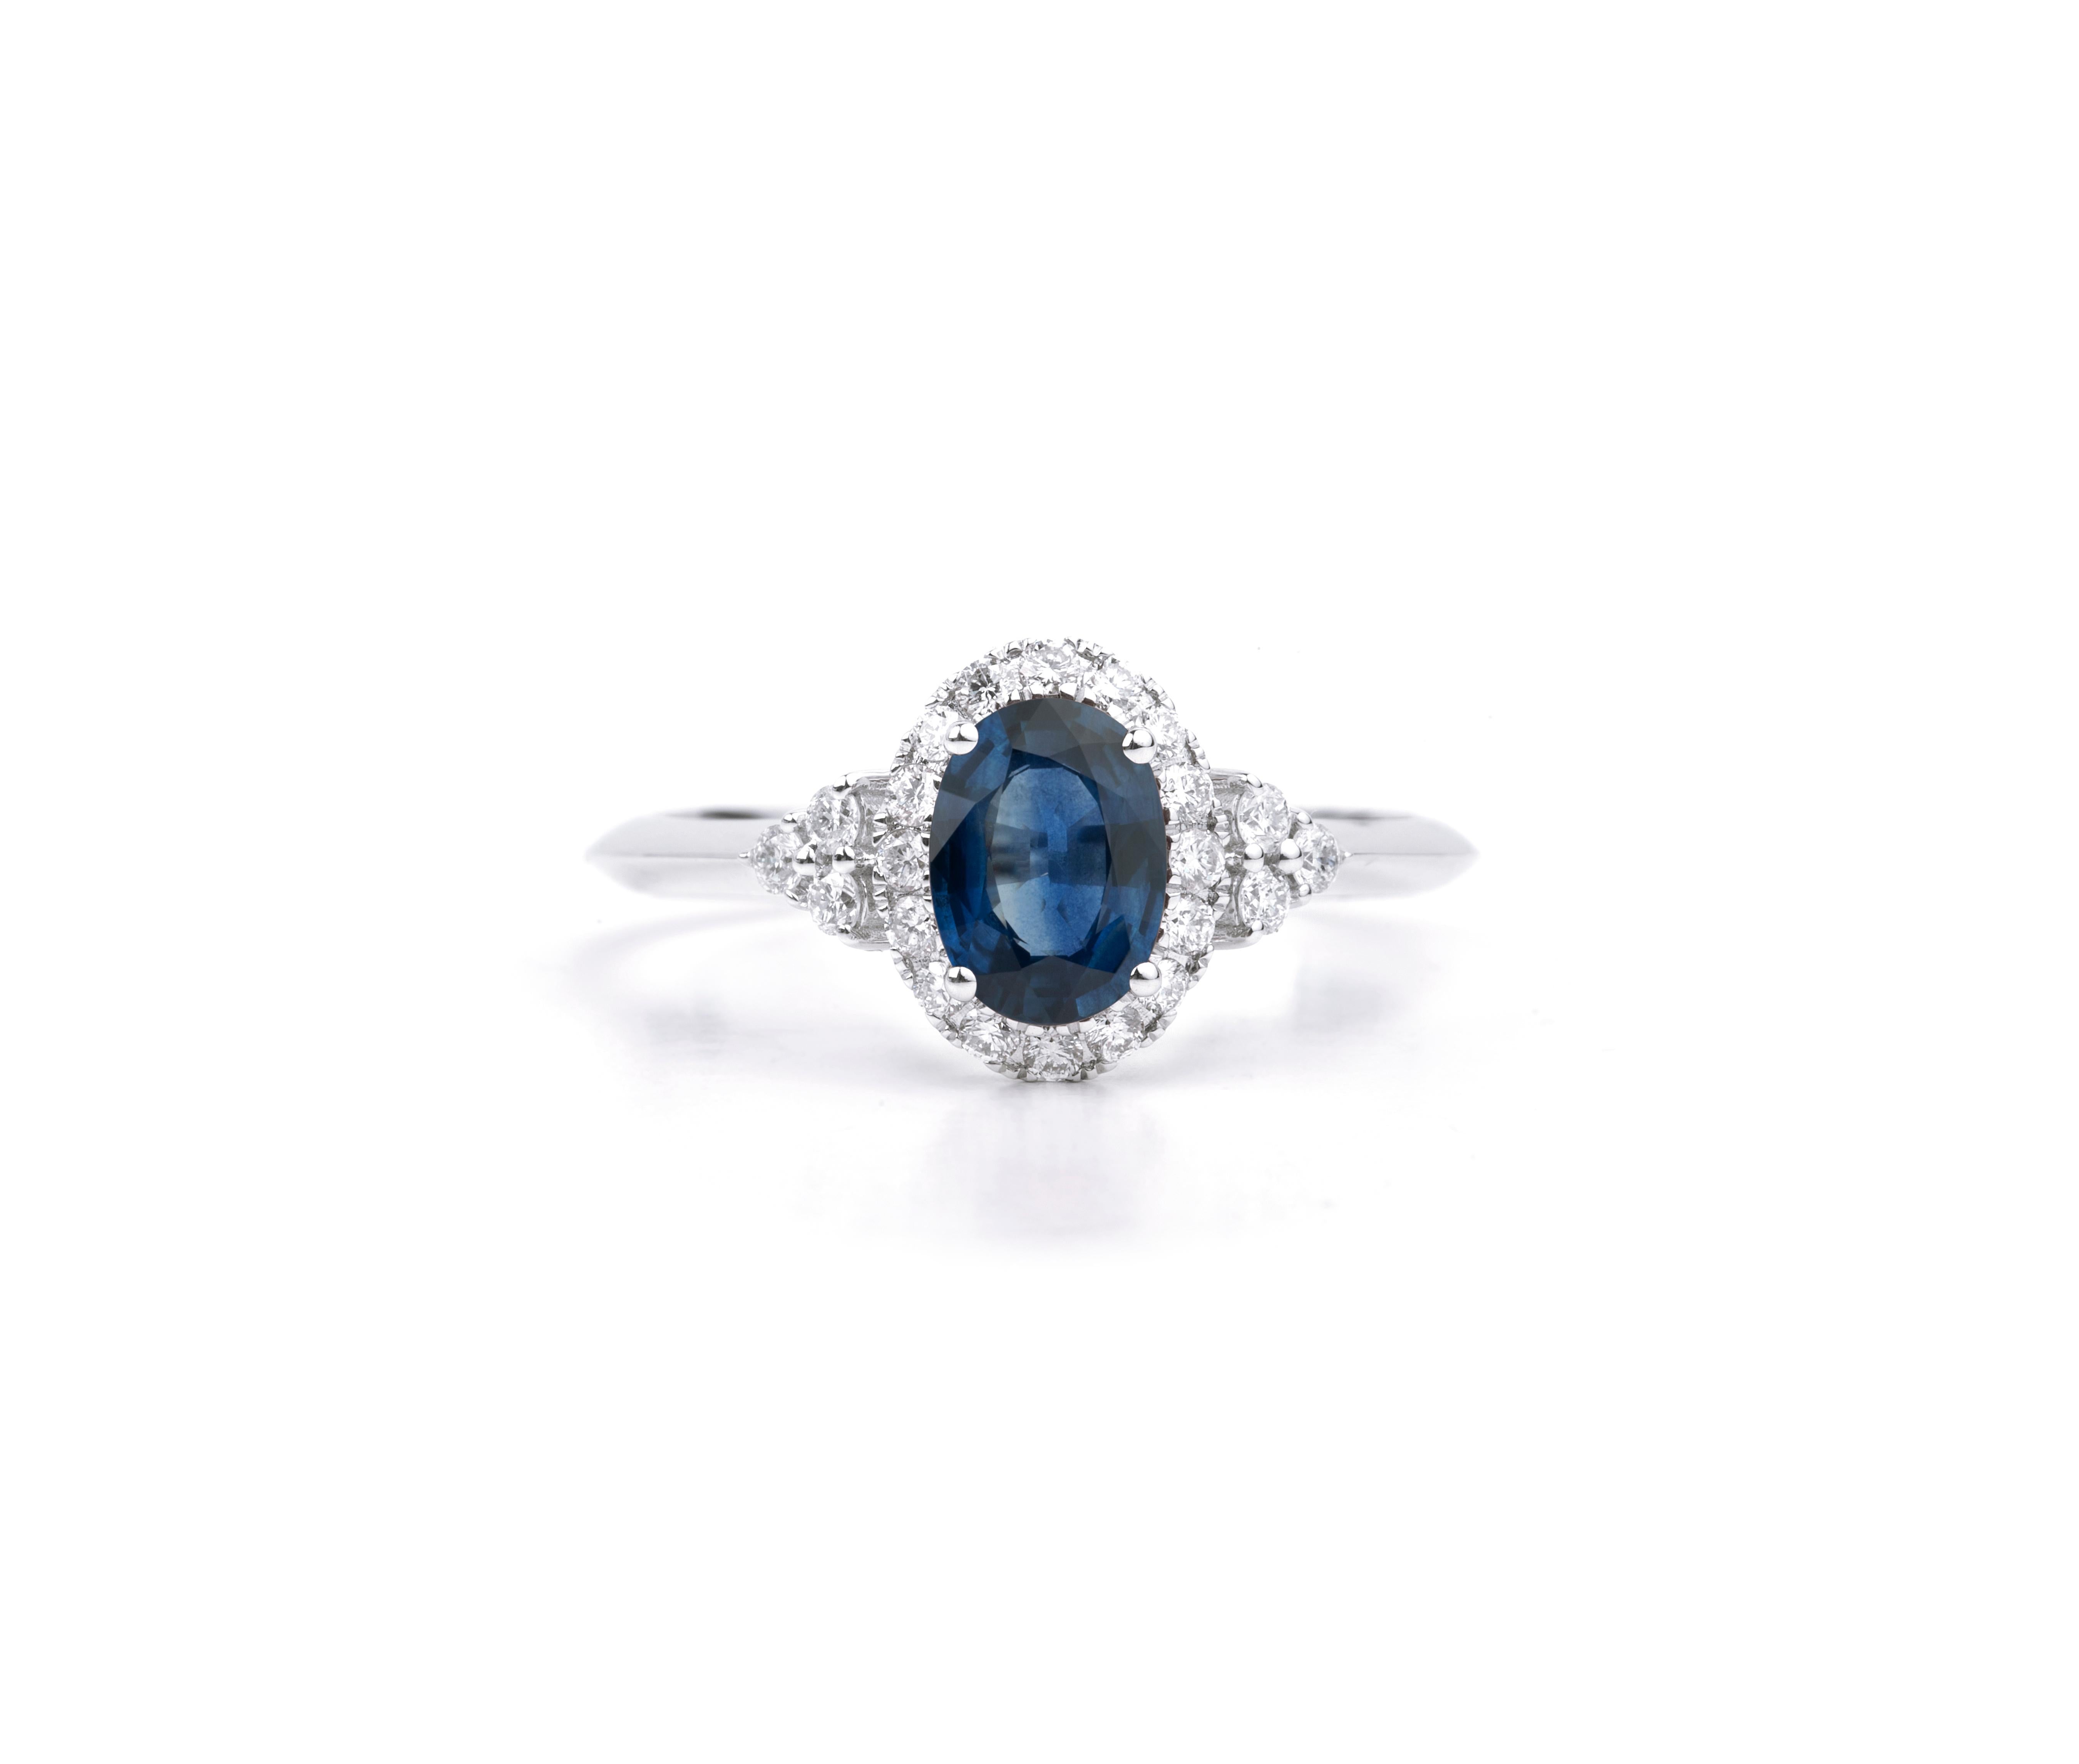 Oval Blue Sapphire Diamond Round Cut Double Halo Cocktail Engagement Ring

Available in 18k white gold.

Same design can be made also with other custom gemstones per request.

Product details:

- Solid gold

- Diamond - approx. 0.24 carat

-